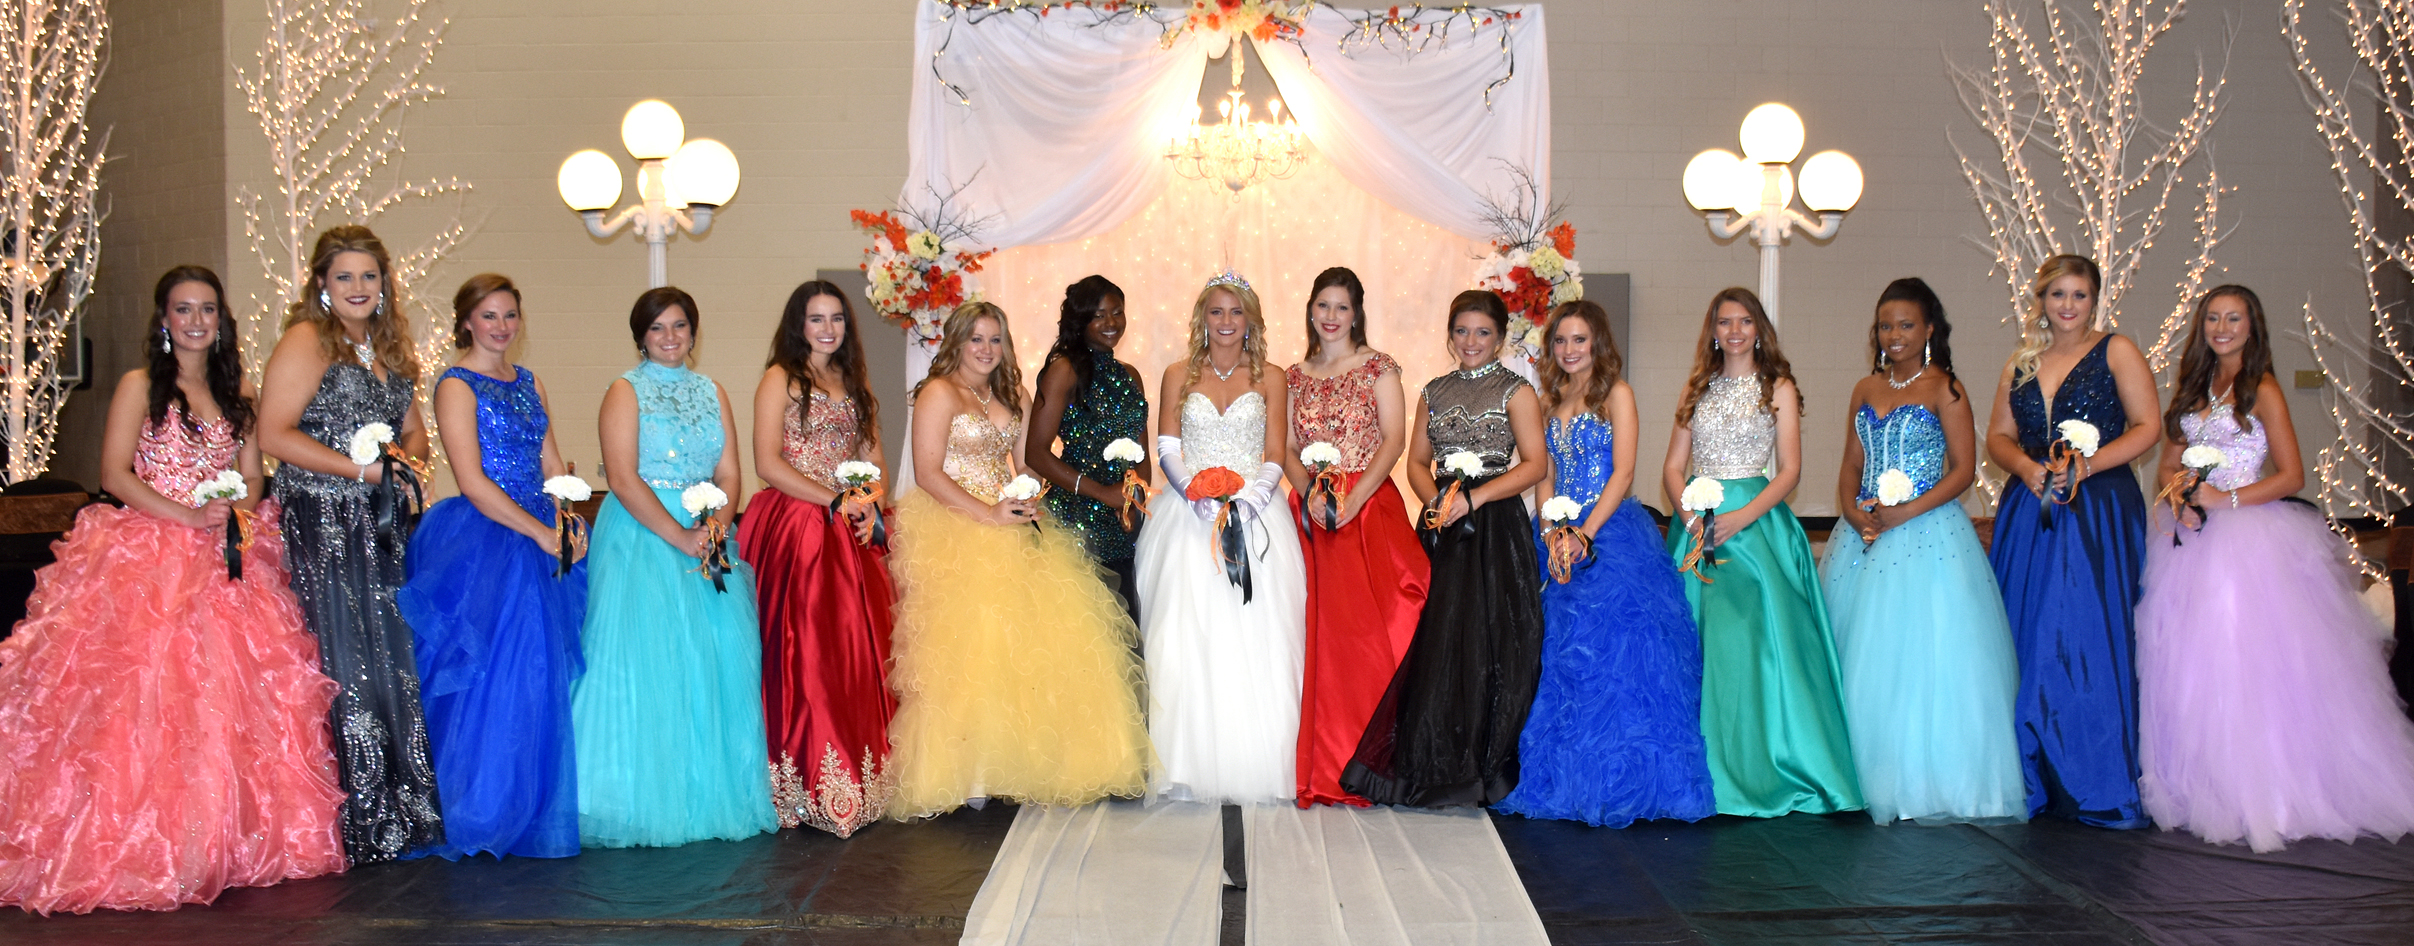 The NHS Homecoming royalty includes Audra Hughes, Alyssa Harrison, Nicole Dodson, Emily McCauley, Anna Kesterson, Bailey Dougan, co-maid of honor Asia Munn, Queen Kaylea Carver, co-maid of honor Allison Reeder, Gabi Dougan, Erica Linville, Kerri Murphy, Asia Harris, Kacey Hinds, and McKenzie Morphew. Homecoming ceremonies were held Friday afternoon, Oct. 7, at Scrapper Arena and Friday night at Scrapper Stadium.